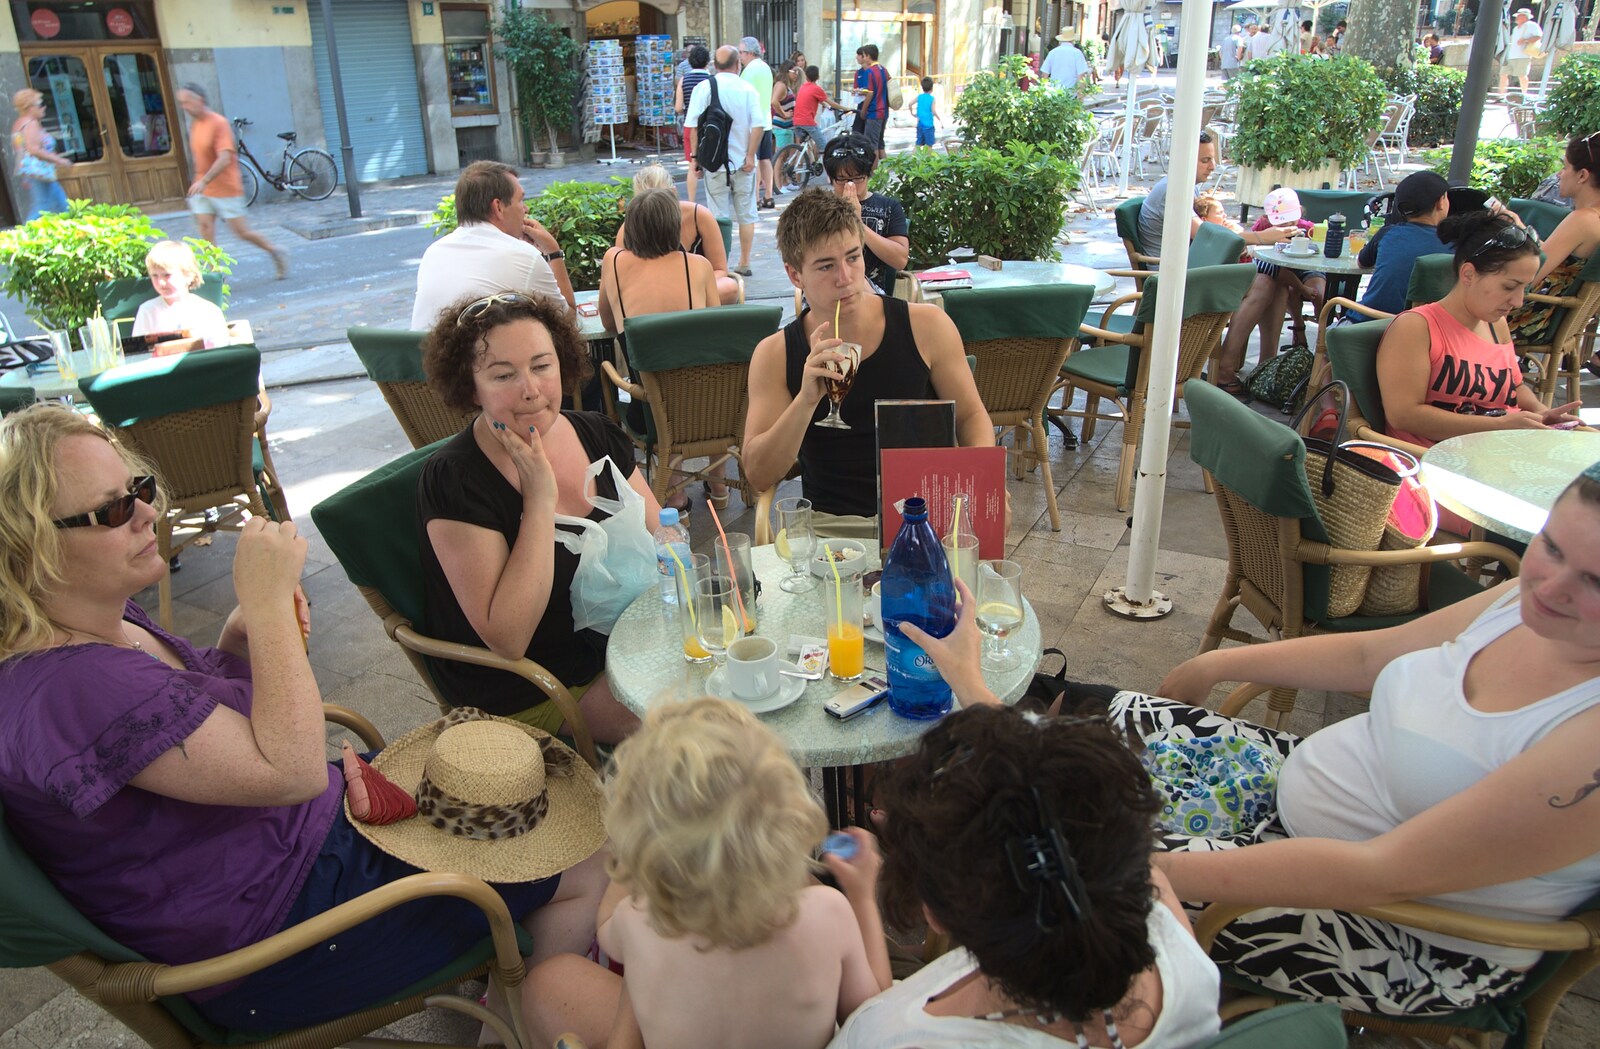 The splinter group hangs out in the square from A Tram Trip to Port Soller, Mallorca - 18th August 2011